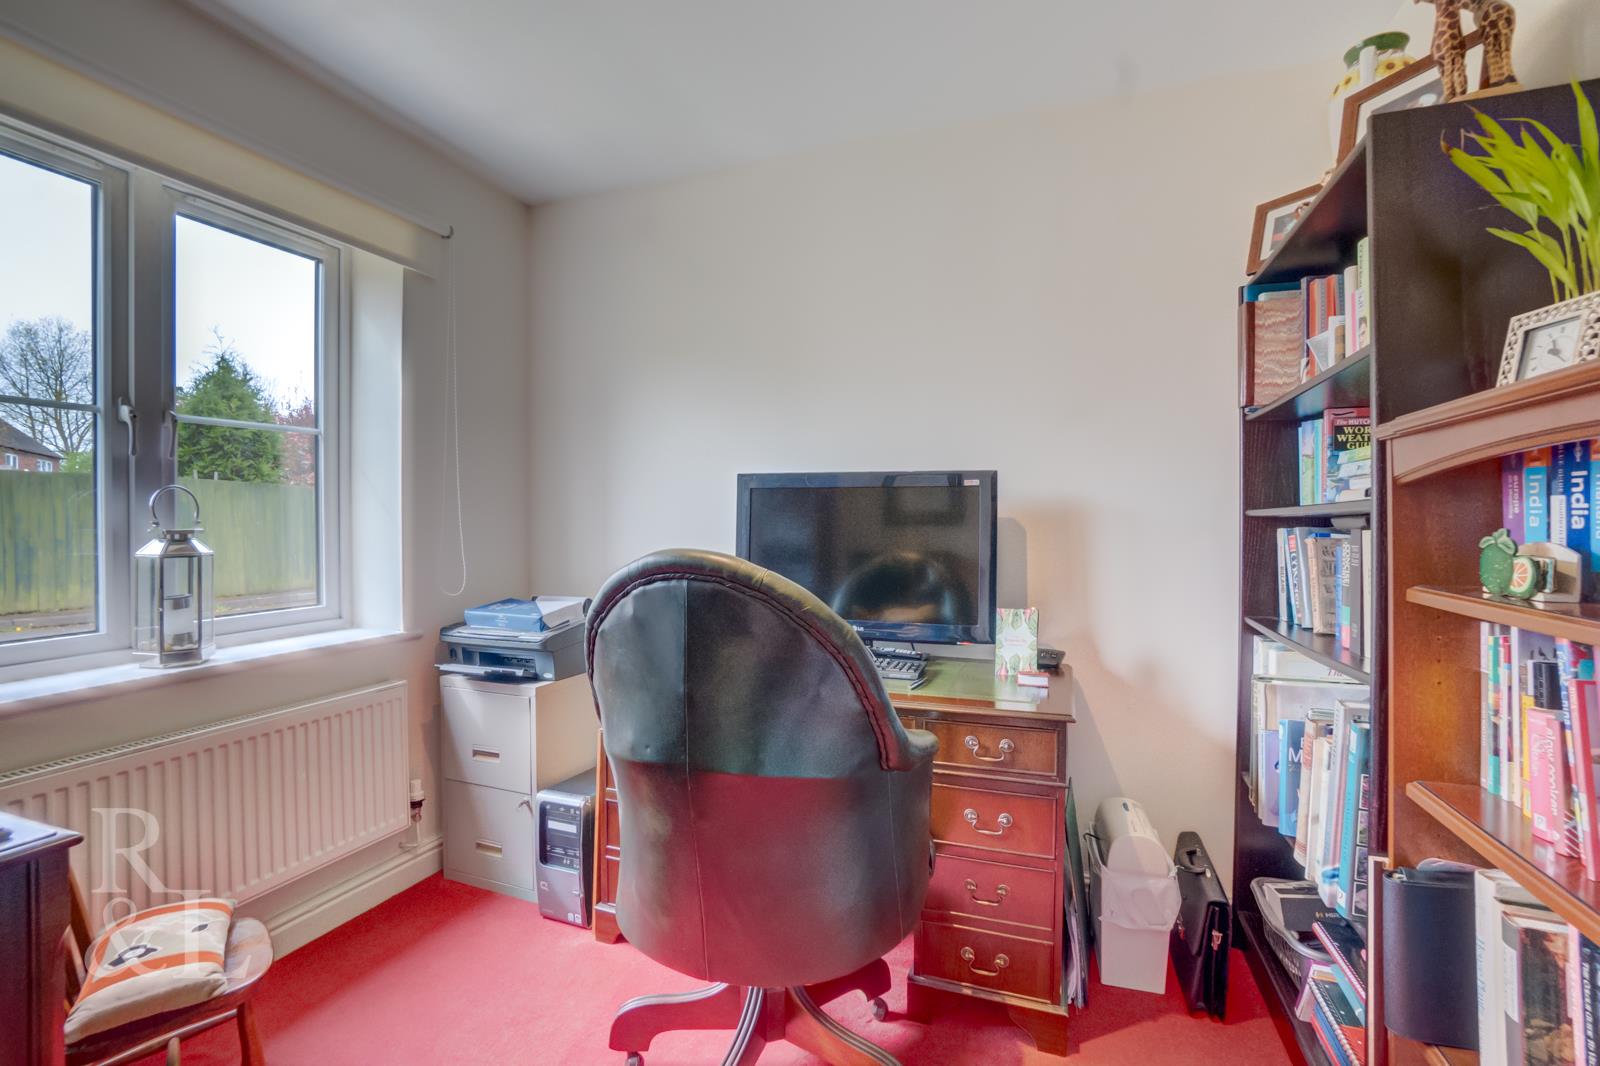 Property image for Daisy Lane, Overseal